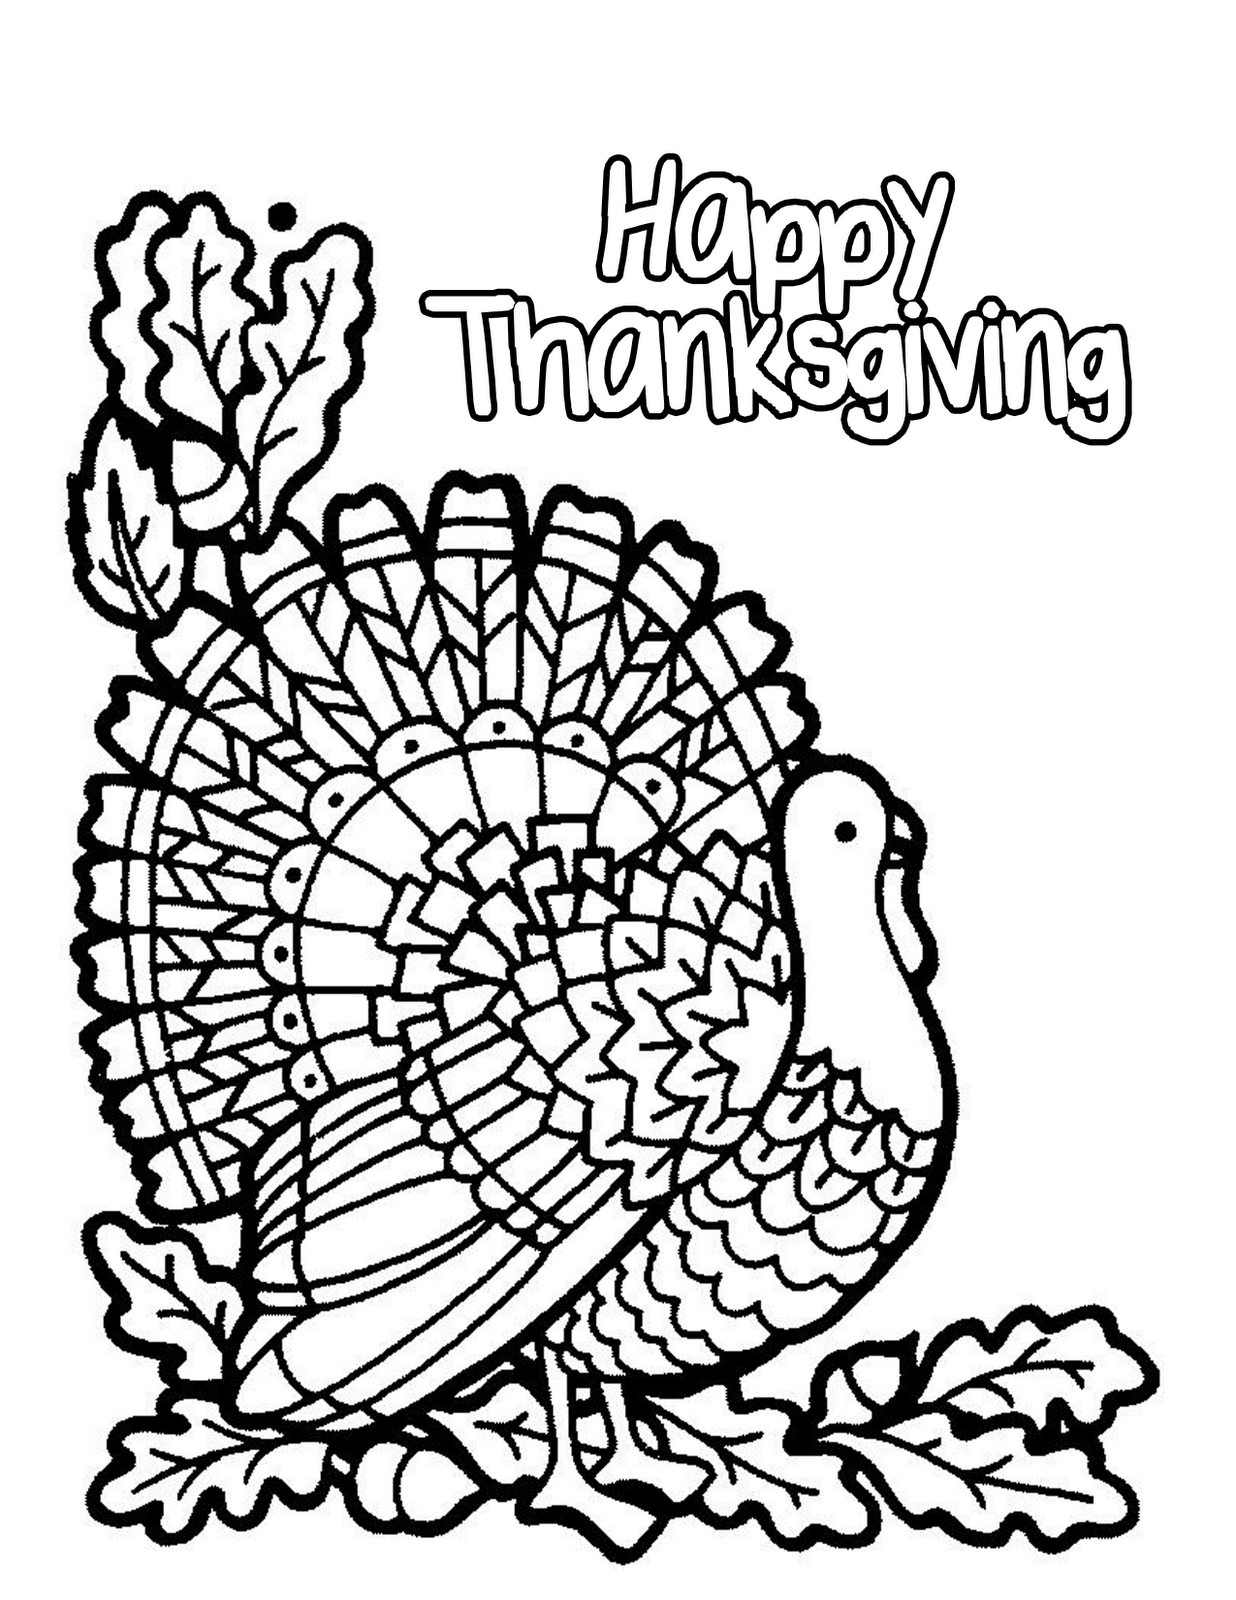 Happy Thanksgiving Day Coloring Pages 2015 - Coloring Pages Sheets ...